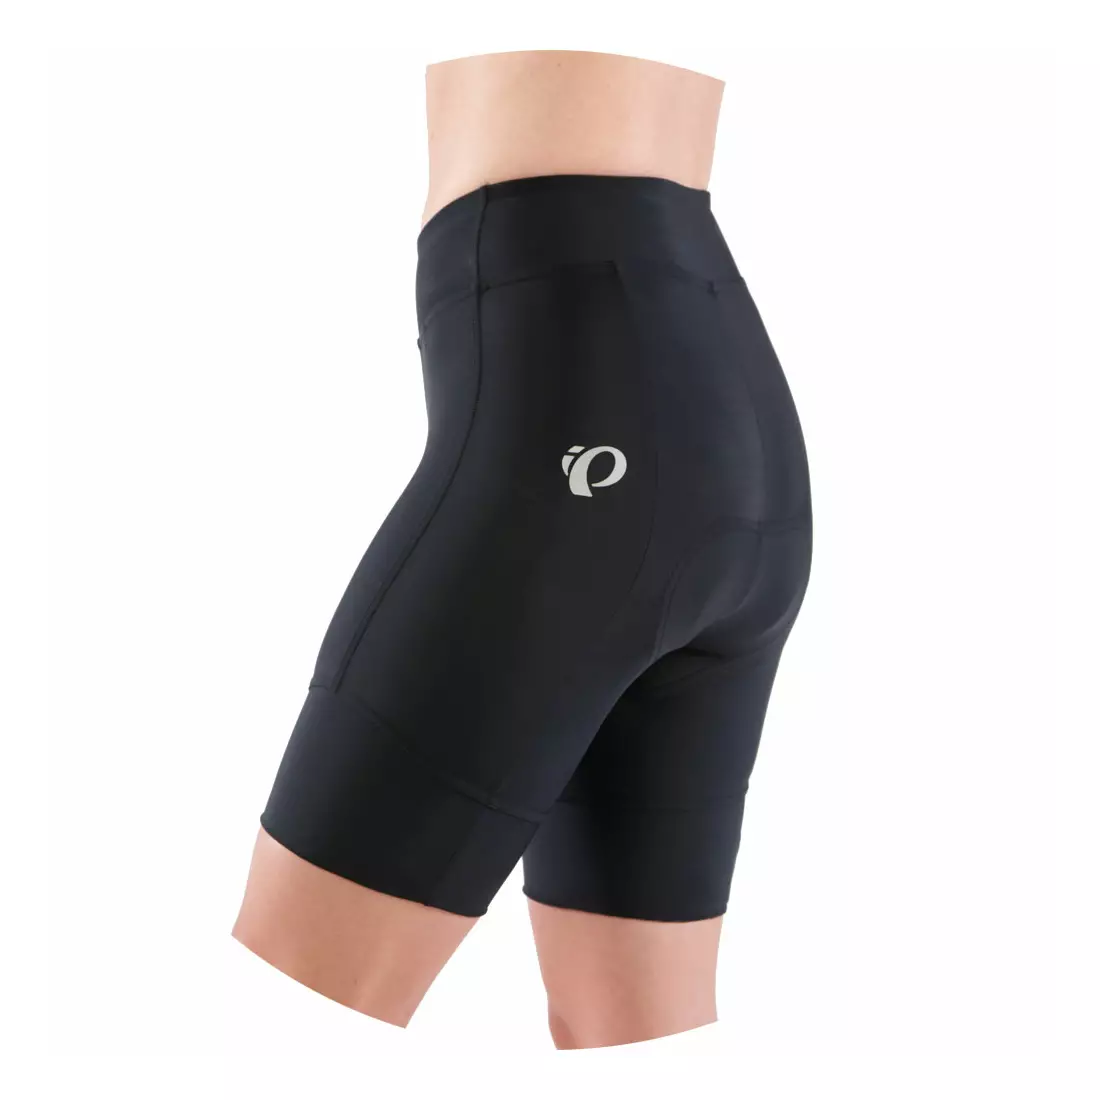 PEARL IZUMI PURSUIT ATTACK women's cycling shorts, without suspenders, 11211703-021